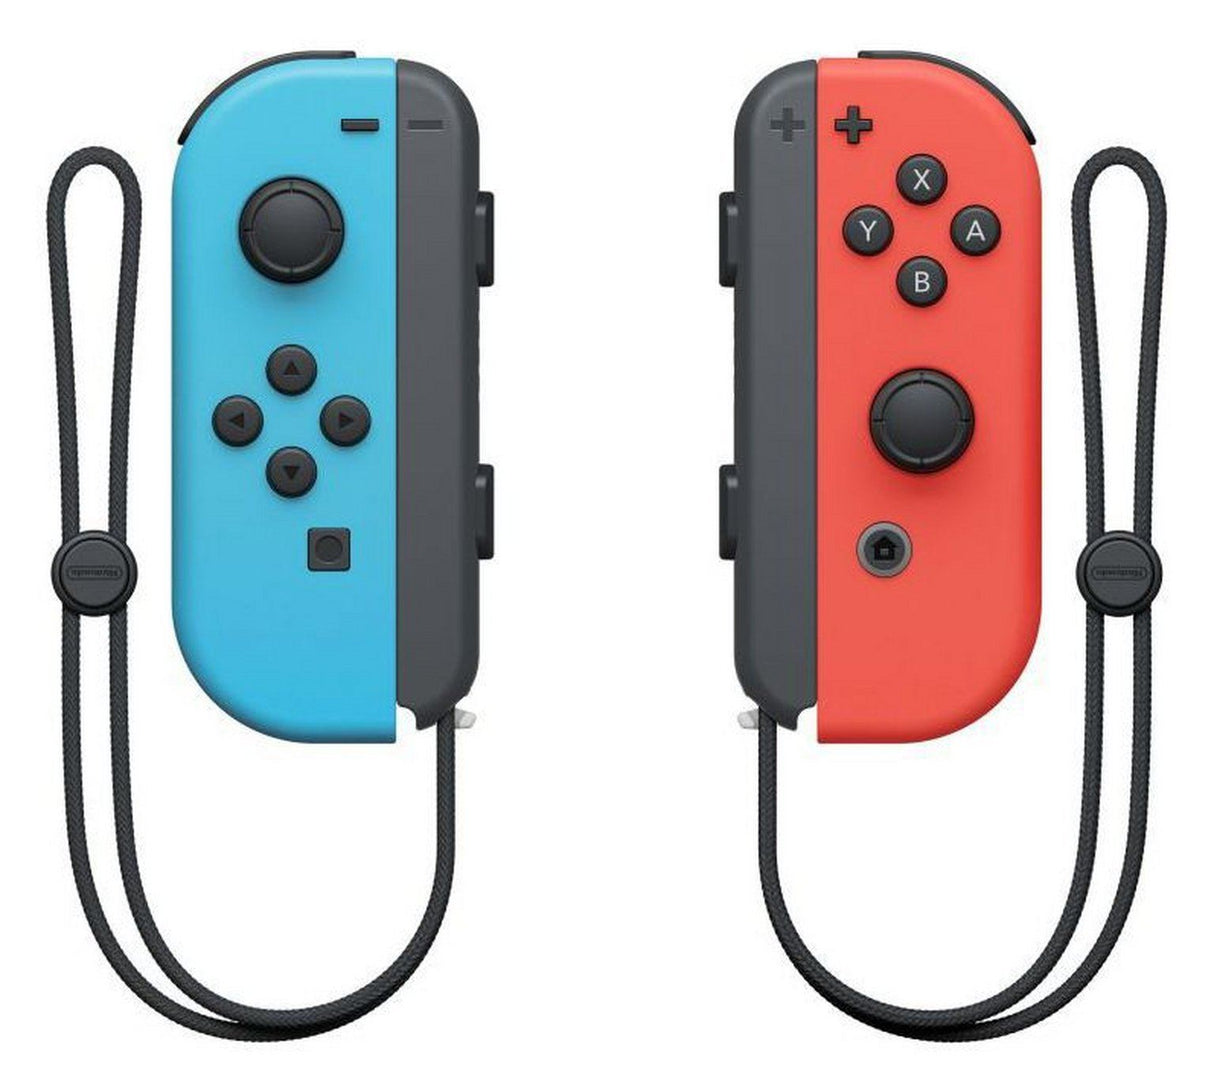 Nintendo Switch Joy-Con (L/R) Controllers - Red & Blue - Level UpNintendoSwitch Accessories45496452636